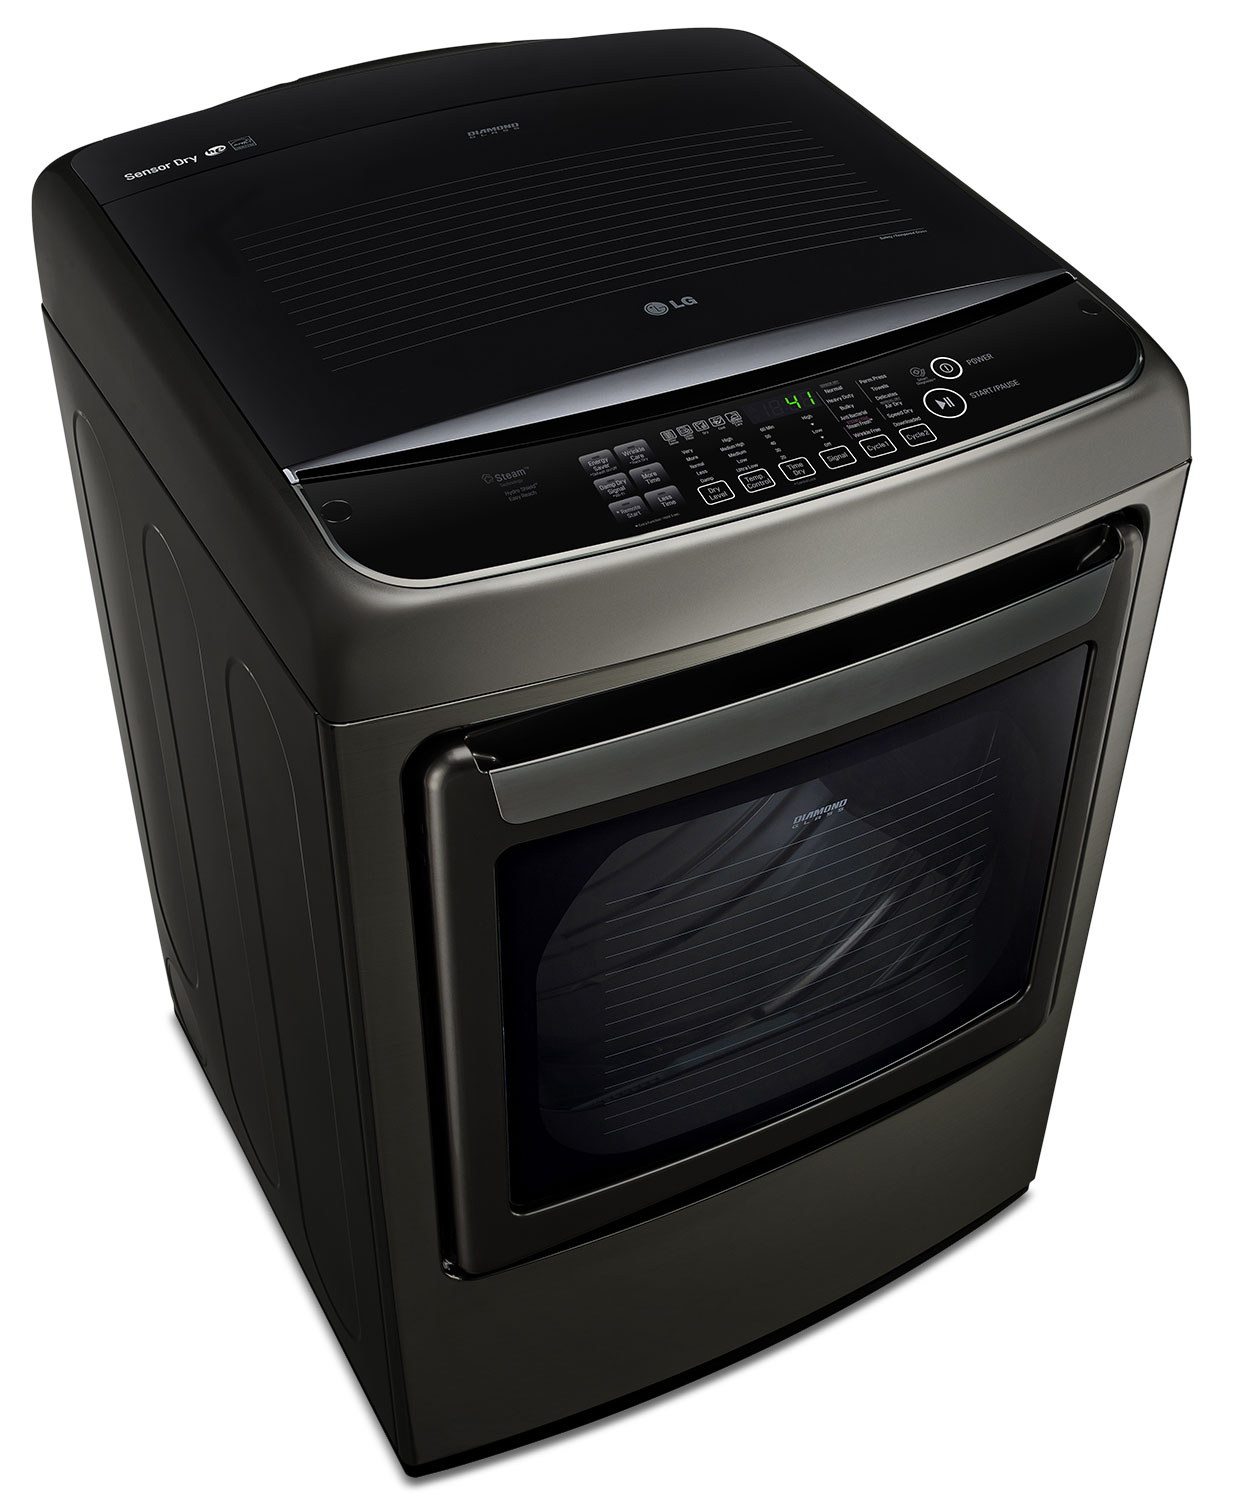 LG Appliances Black Stainless Steel Electric Dryer (7.3 Cu. Ft Lg Dryer Black Stainless Steel